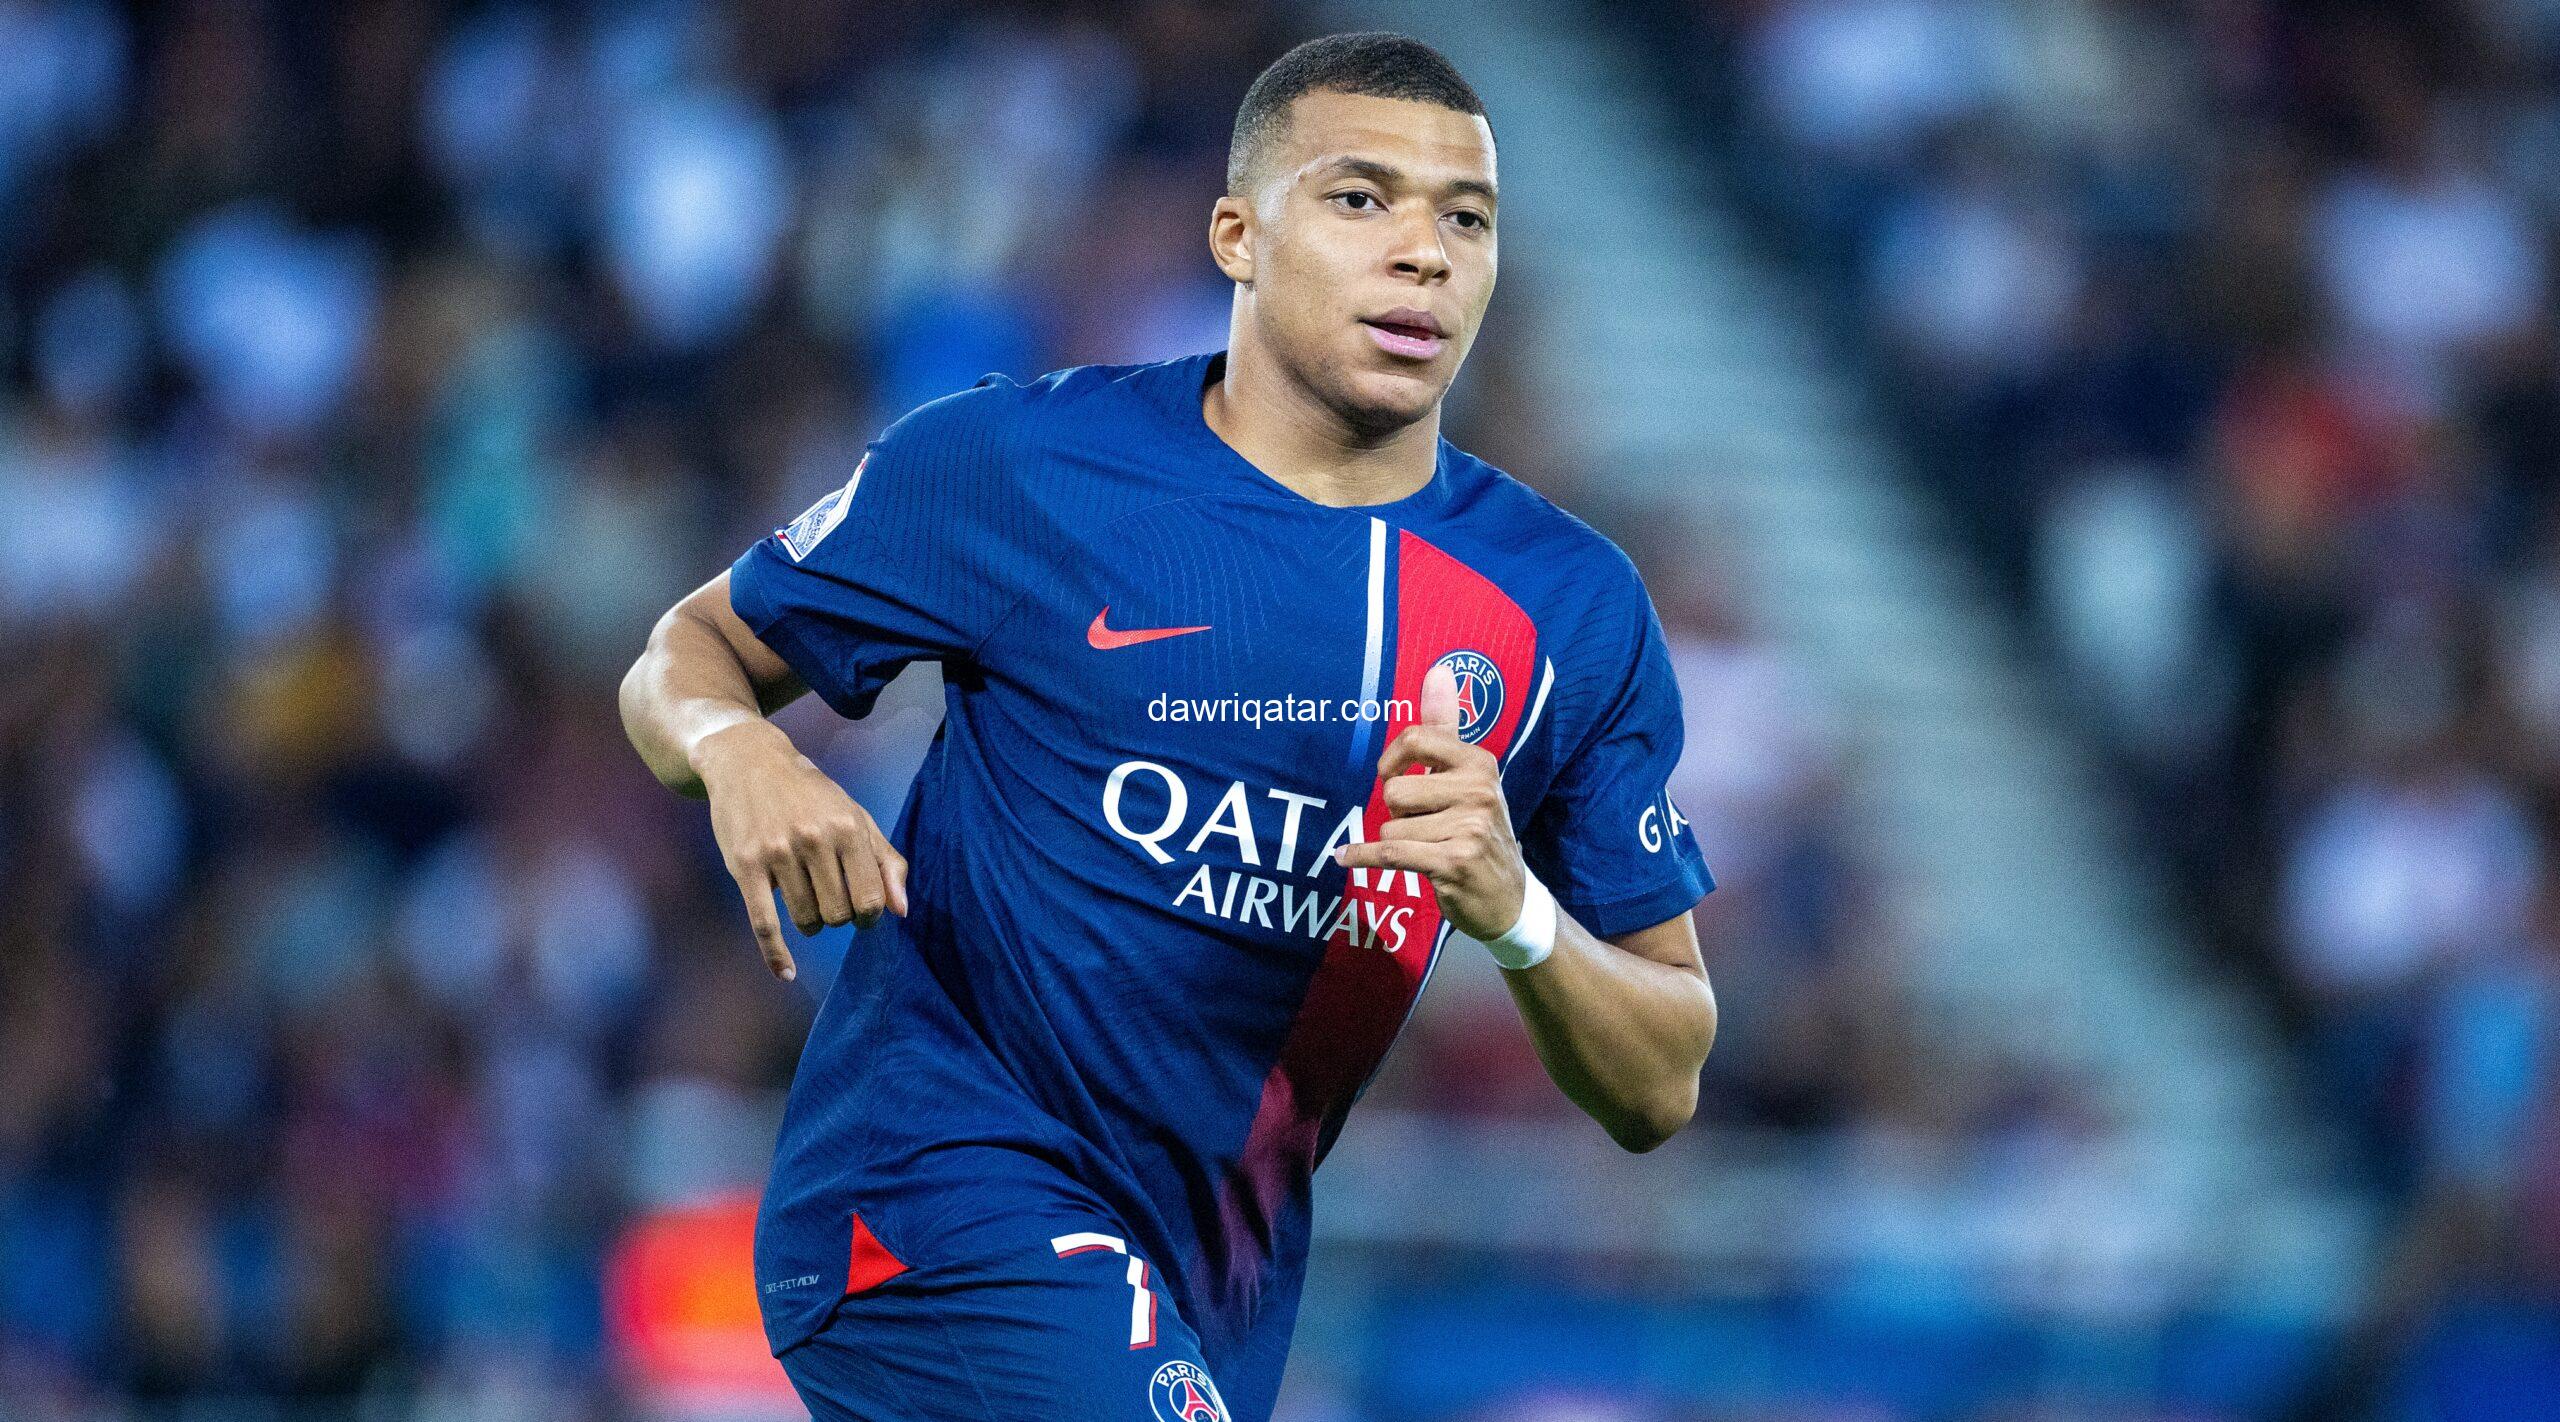 Kylian Mbappe of PSG running during a match